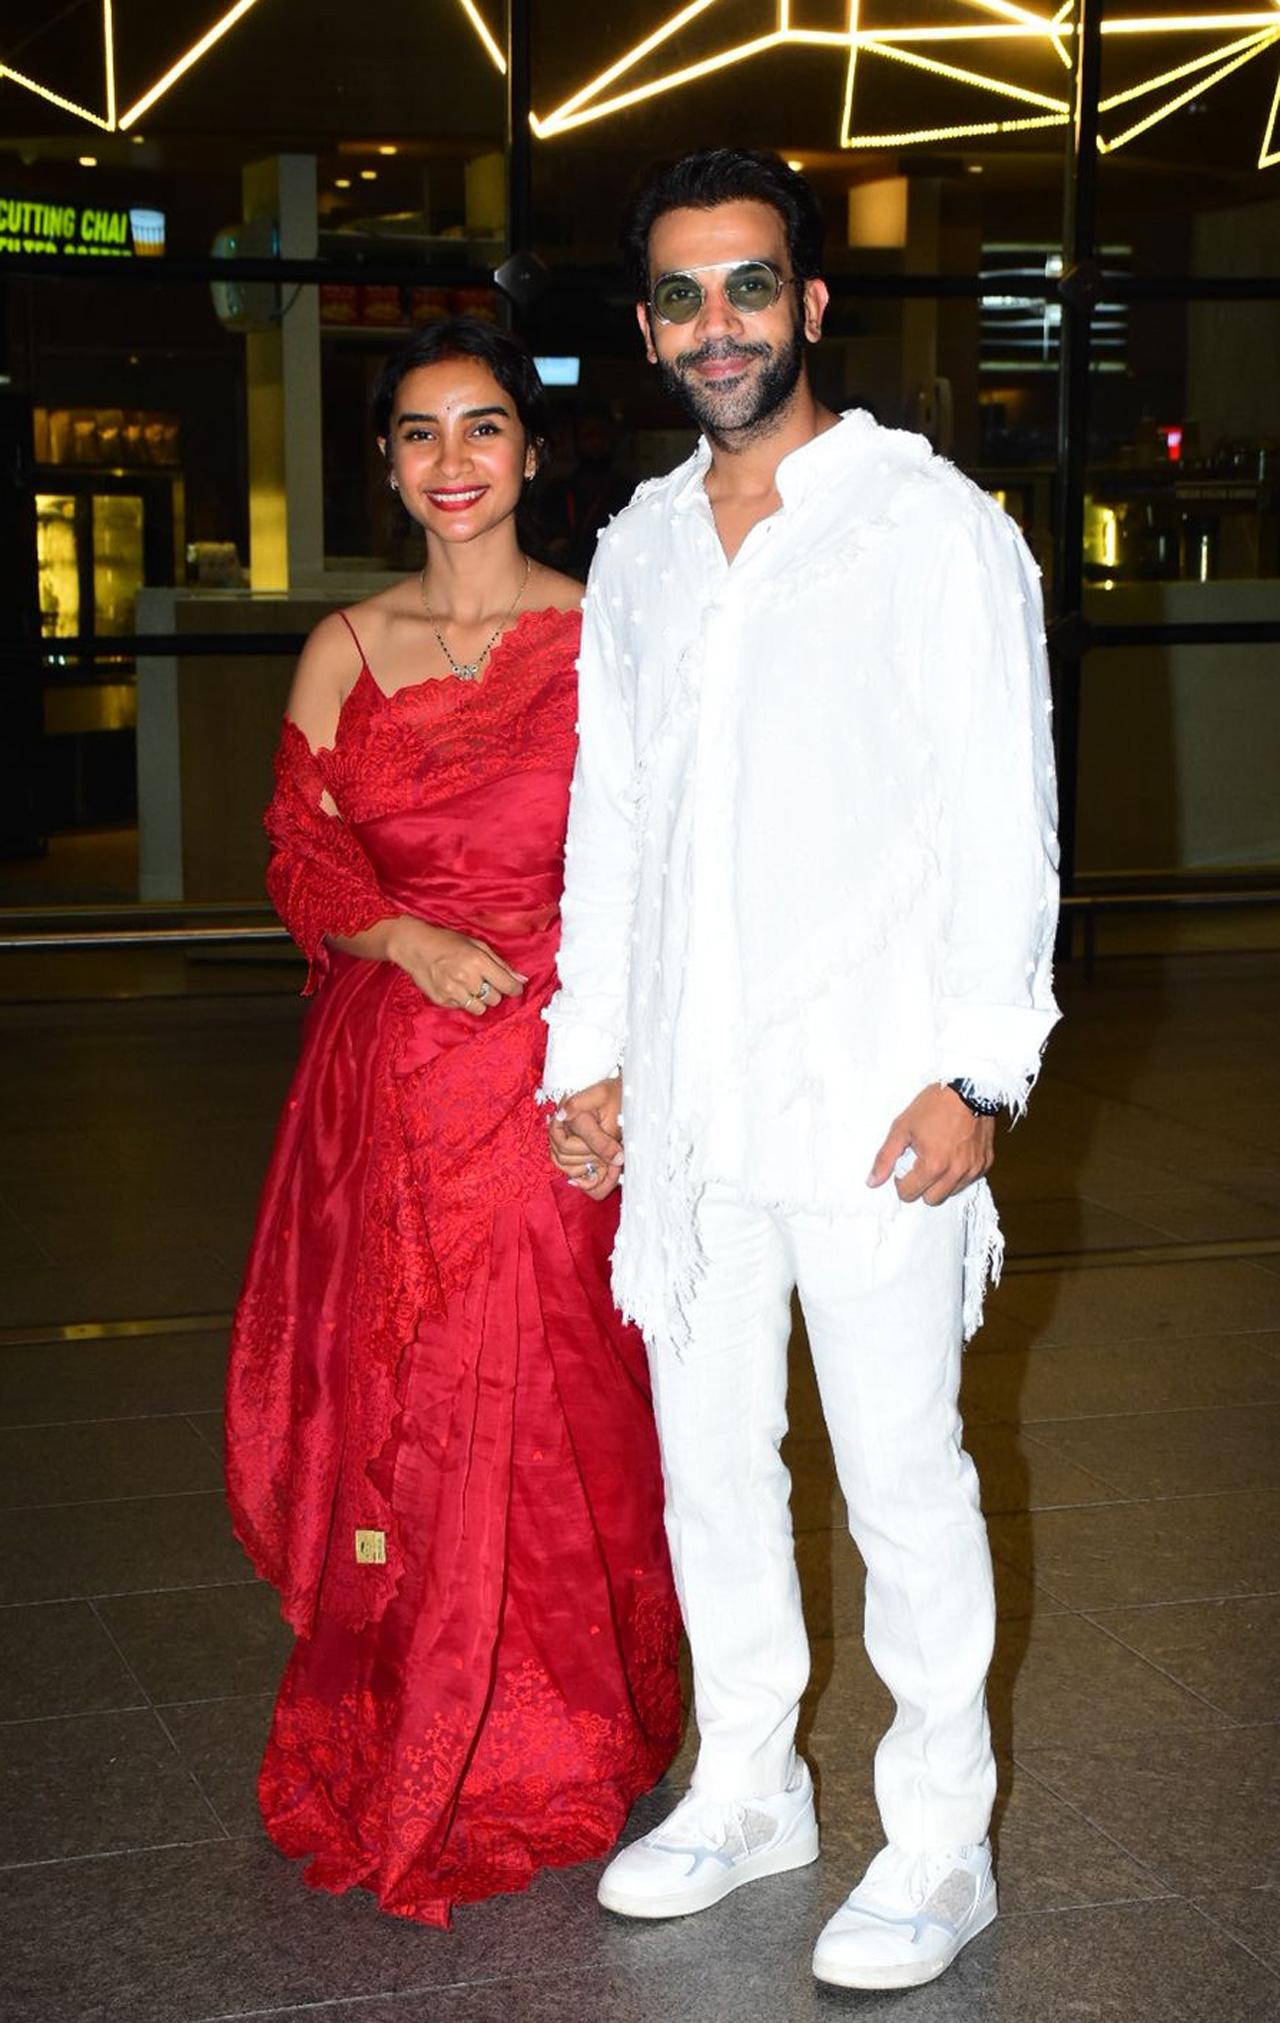 Congratulatory messages have been pouring in for celebrity couple Rajkummar Rao and Patralekhaa ever since they shared their wedding pictures on social media on Monday. Taking to her Instagram handle on Tuesday, filmmaker Farah Khan shared a picture in which she can be seen posing with the bride and the groom from the wedding day.